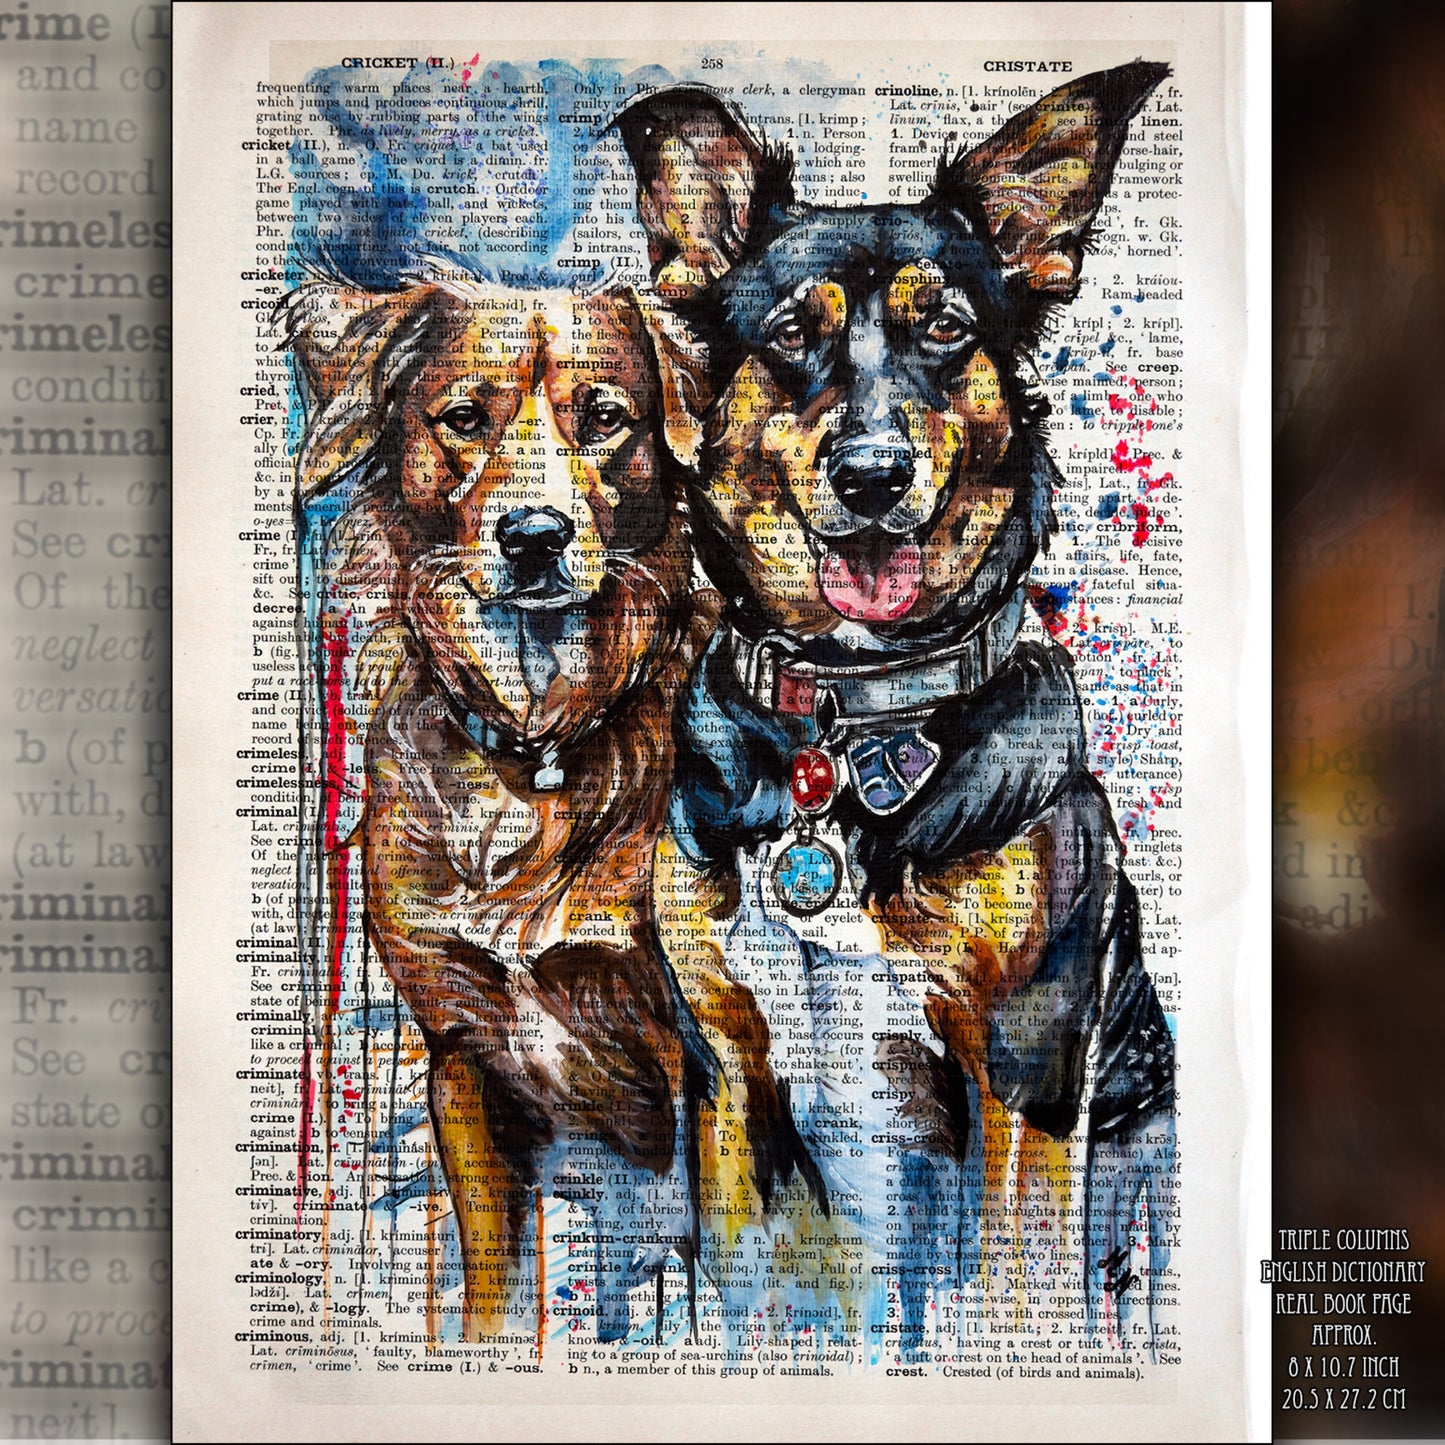 Digital art "Friends" by Malgorzata Nierobisz, showcasing two dogs with detailed fur, reflecting mutual trust and affection on an upcycled vintage dictionary page.